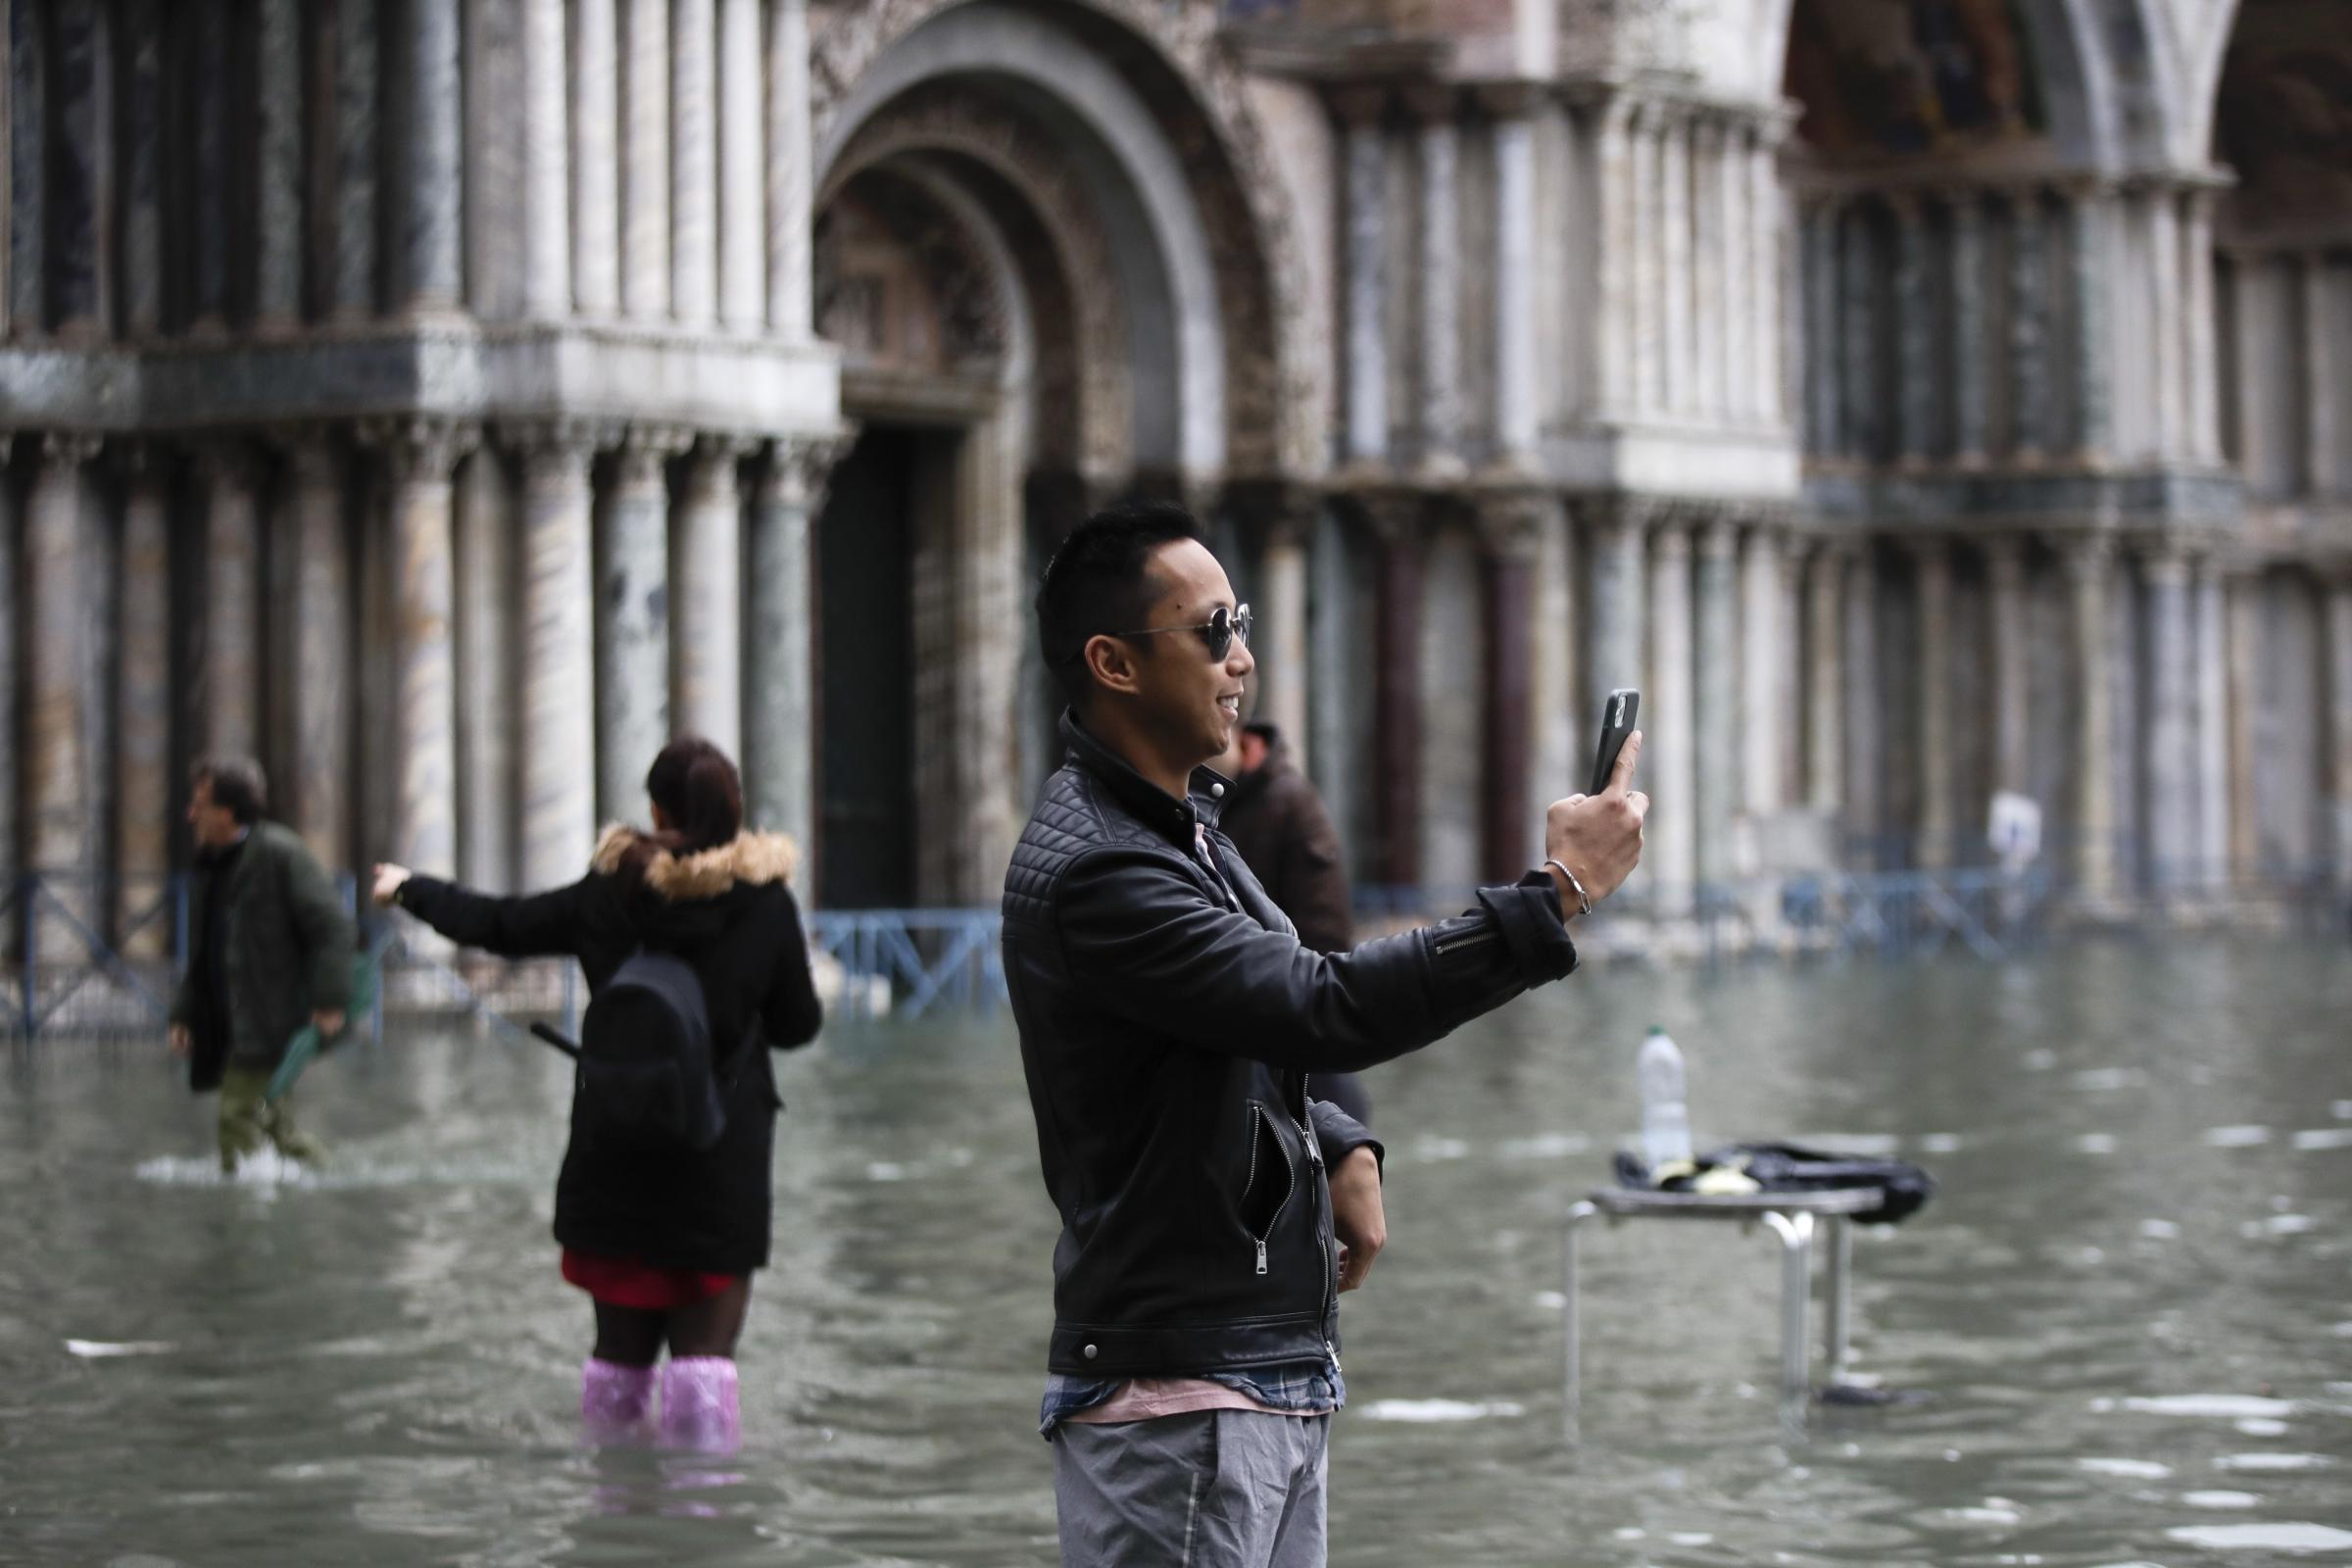 St Mark's Square reopens in Venice after flooding forced closure - Chelmsford Weekly News